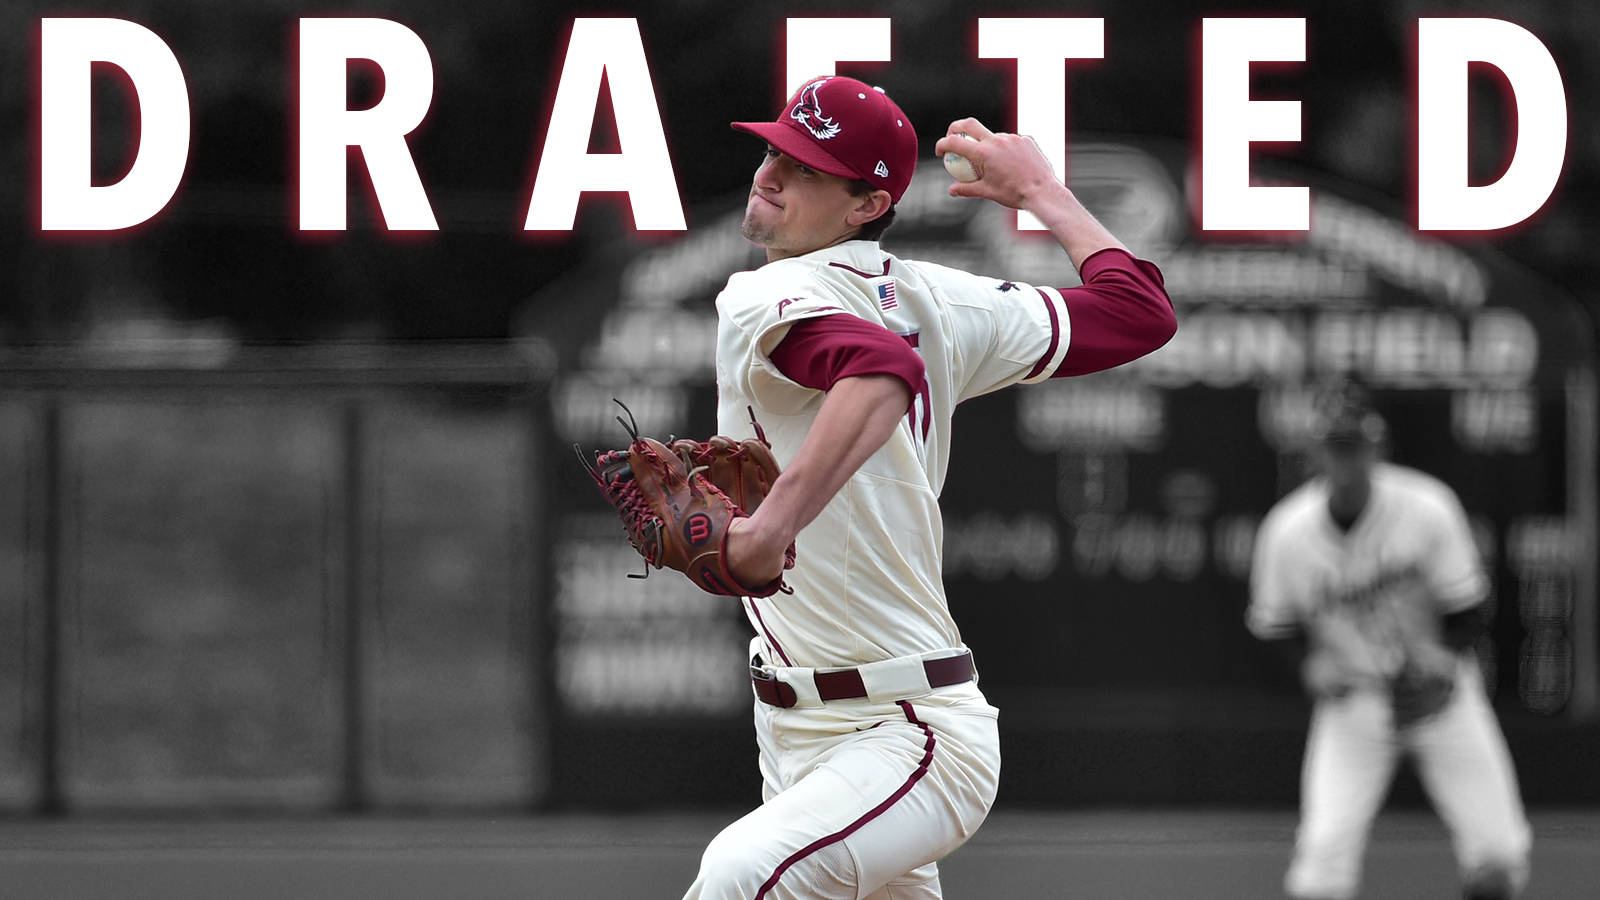 Tim Brennan Selected By Texas Rangers In Mlb Draft - Pitcher - HD Wallpaper 